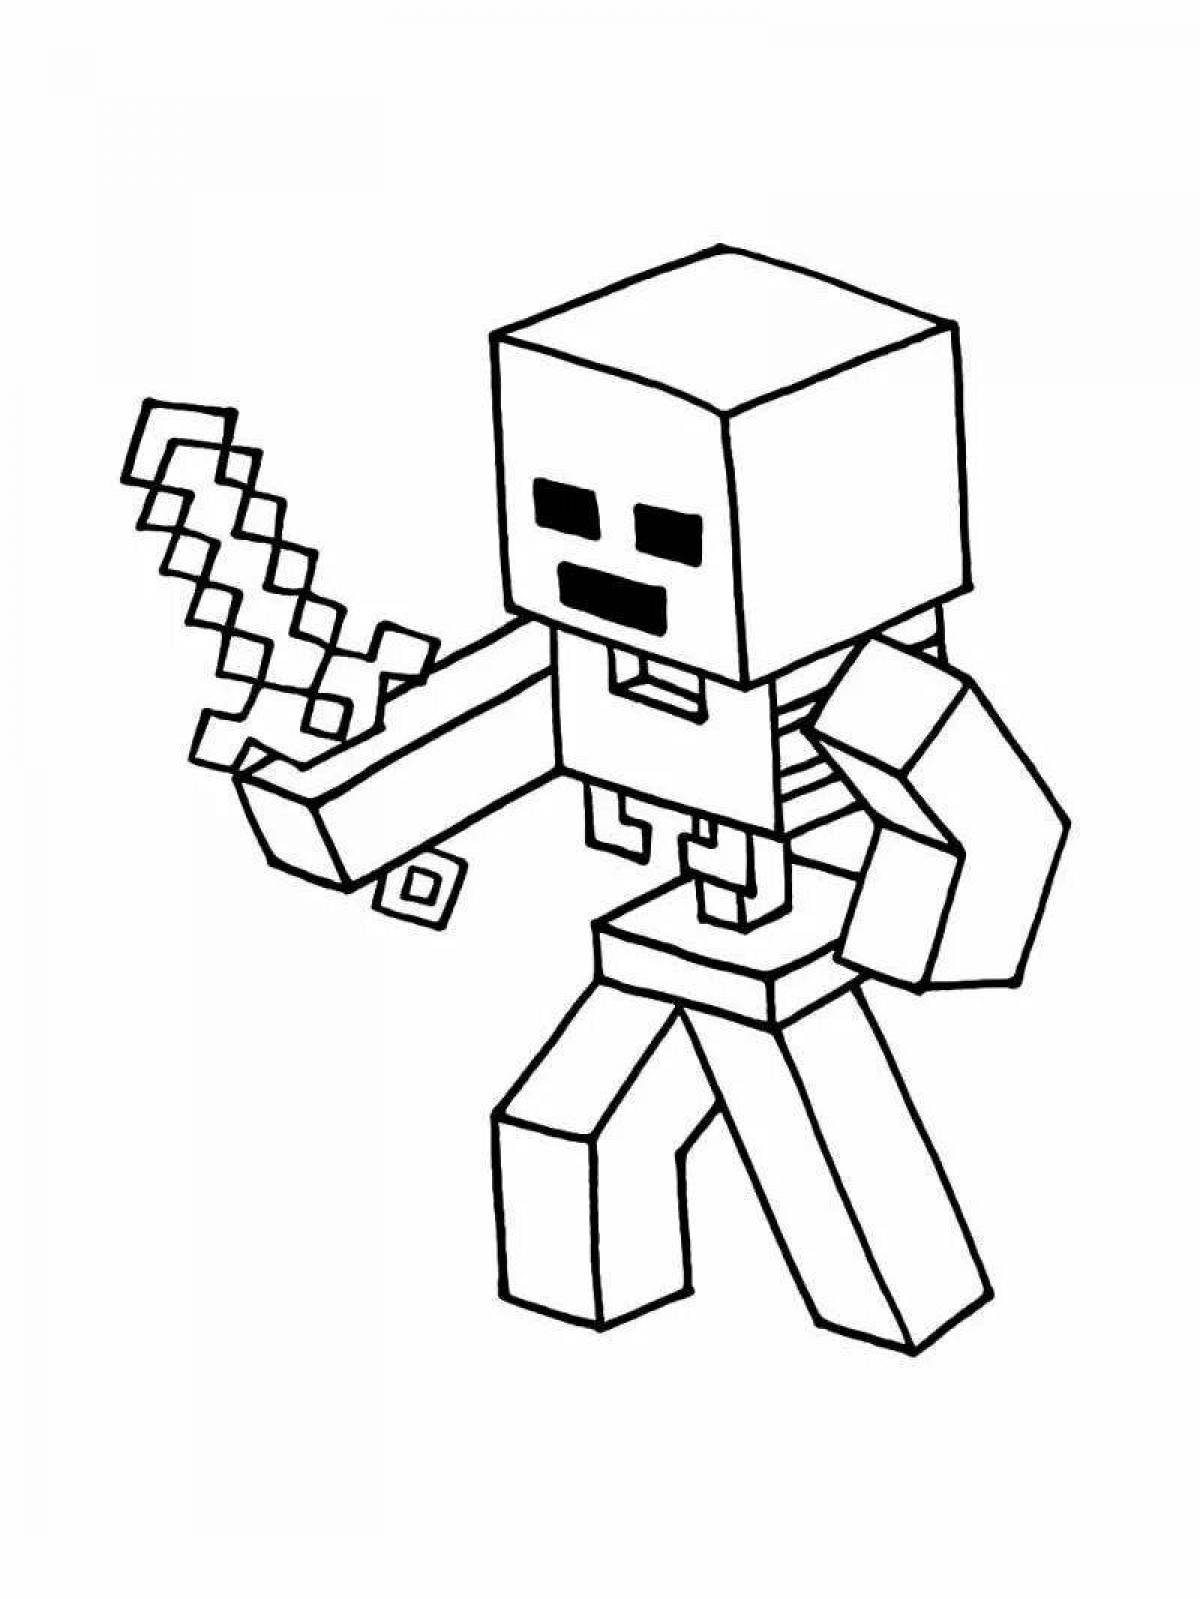 Coloring pages with fun minecraft characters